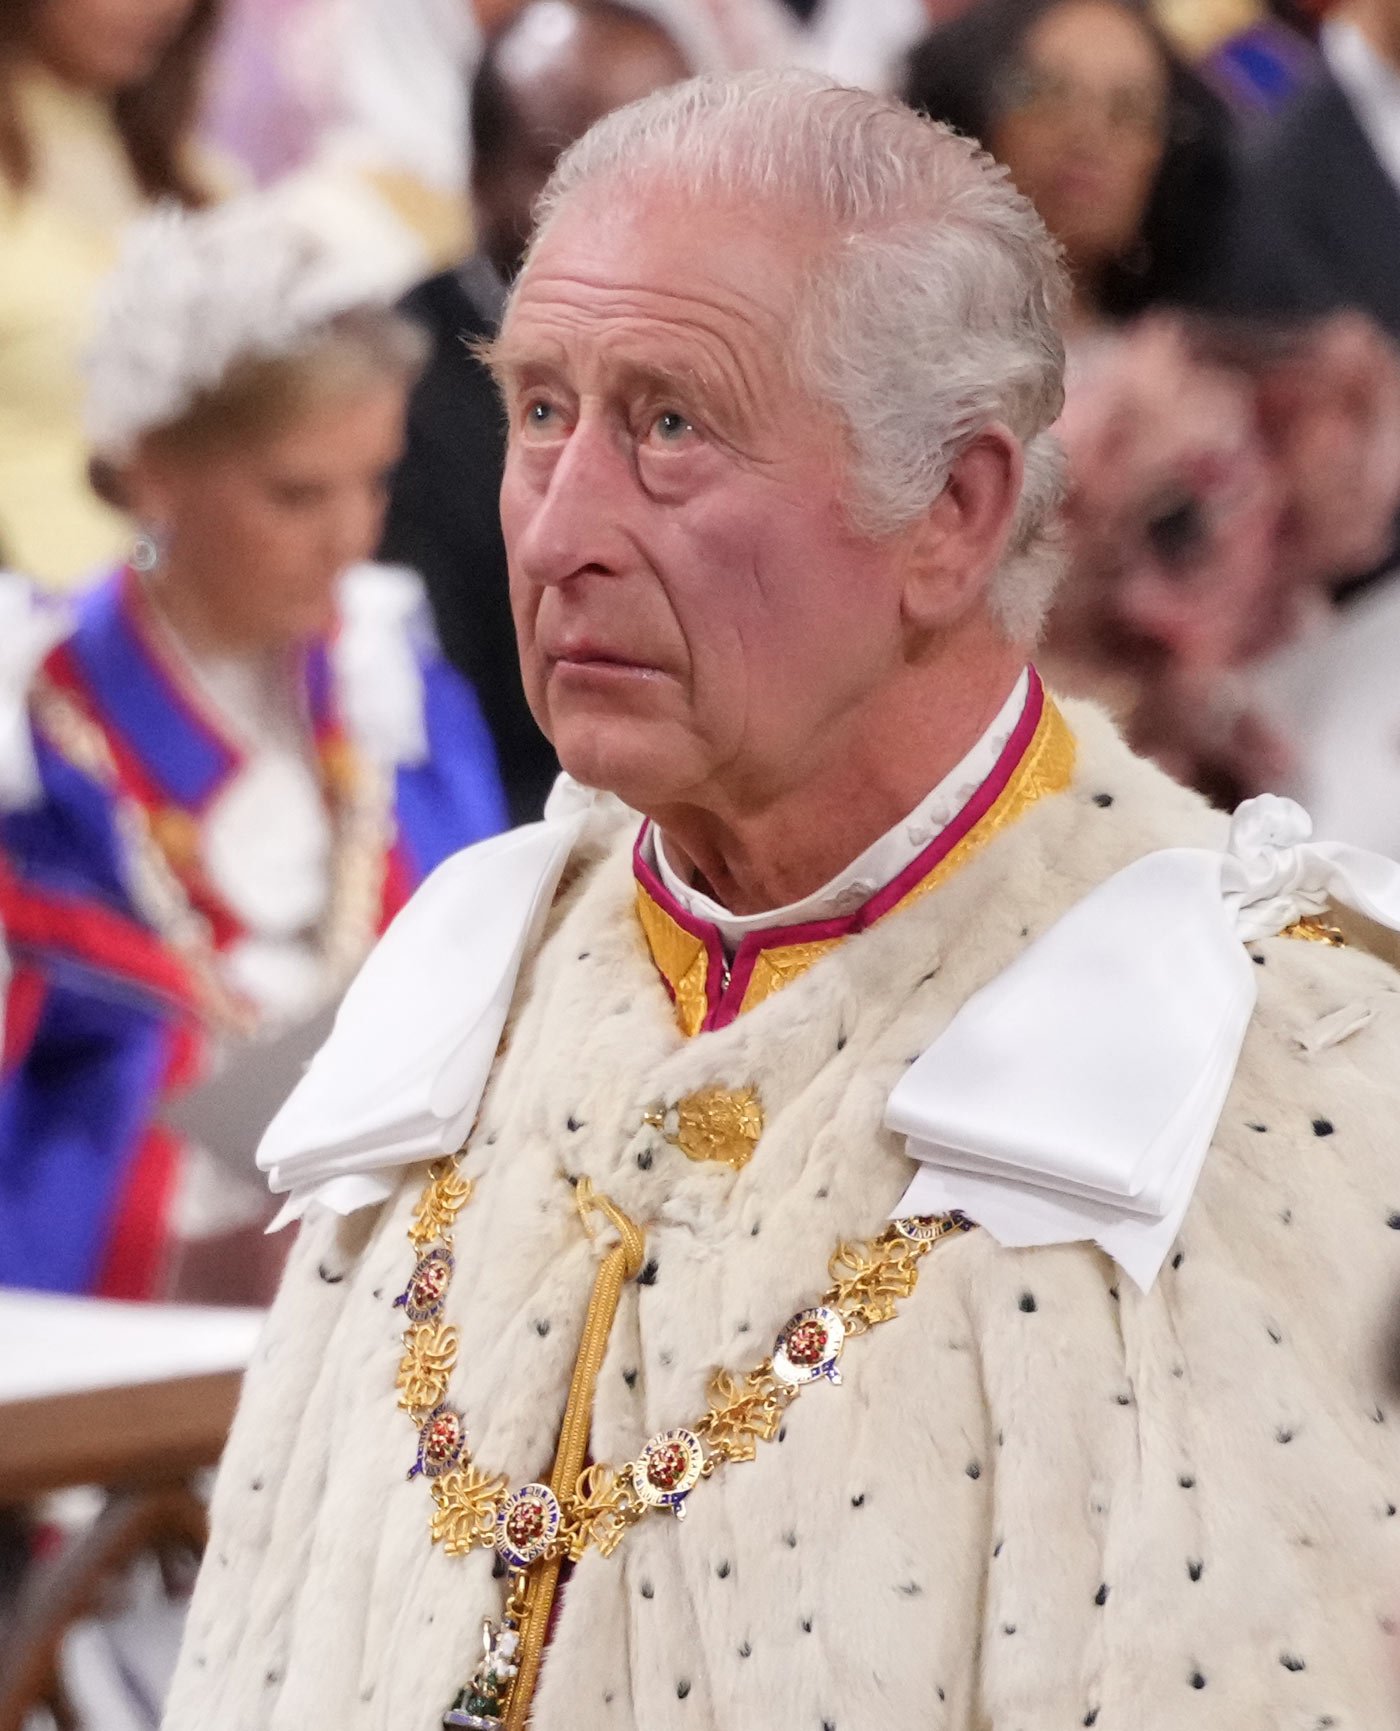 King Charles III looks on ahead of the crowning ceremony